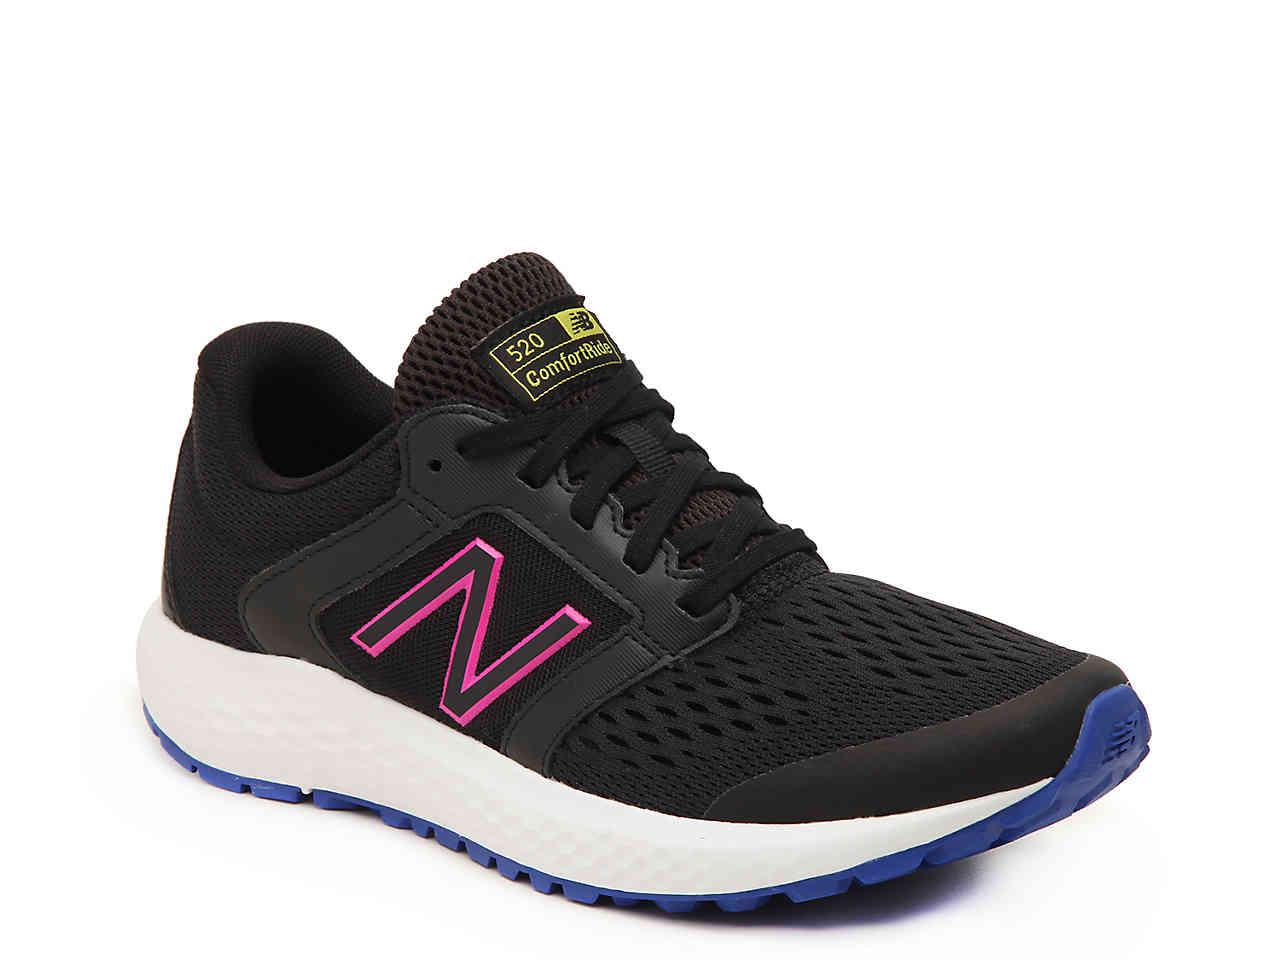 New Balance Synthetic 520 Comfortride Lightweight Running Shoe in Black ...